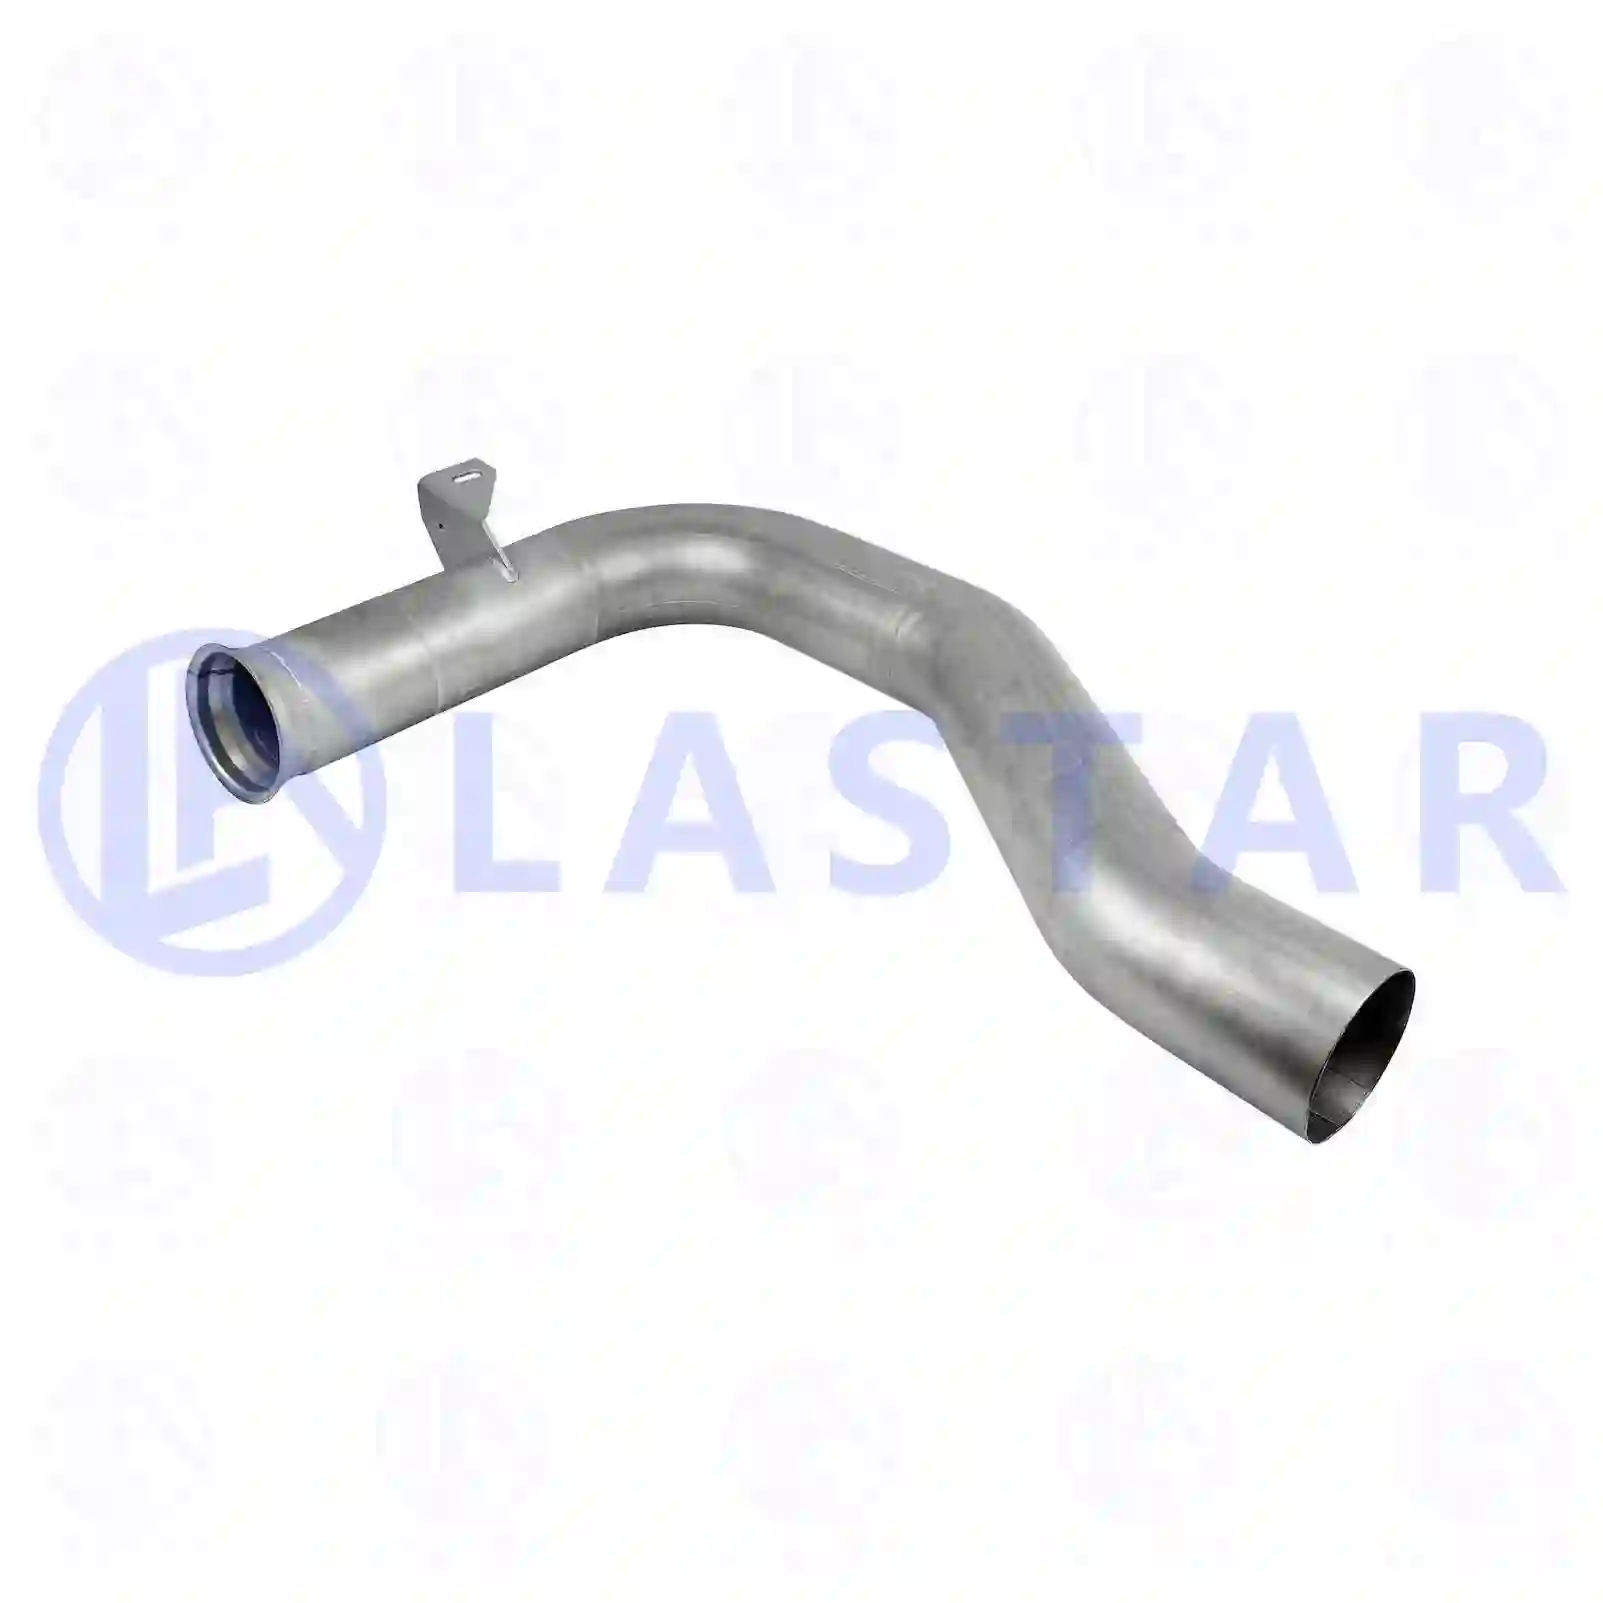 Front exhaust pipe, 77706494, 1610673 ||  77706494 Lastar Spare Part | Truck Spare Parts, Auotomotive Spare Parts Front exhaust pipe, 77706494, 1610673 ||  77706494 Lastar Spare Part | Truck Spare Parts, Auotomotive Spare Parts